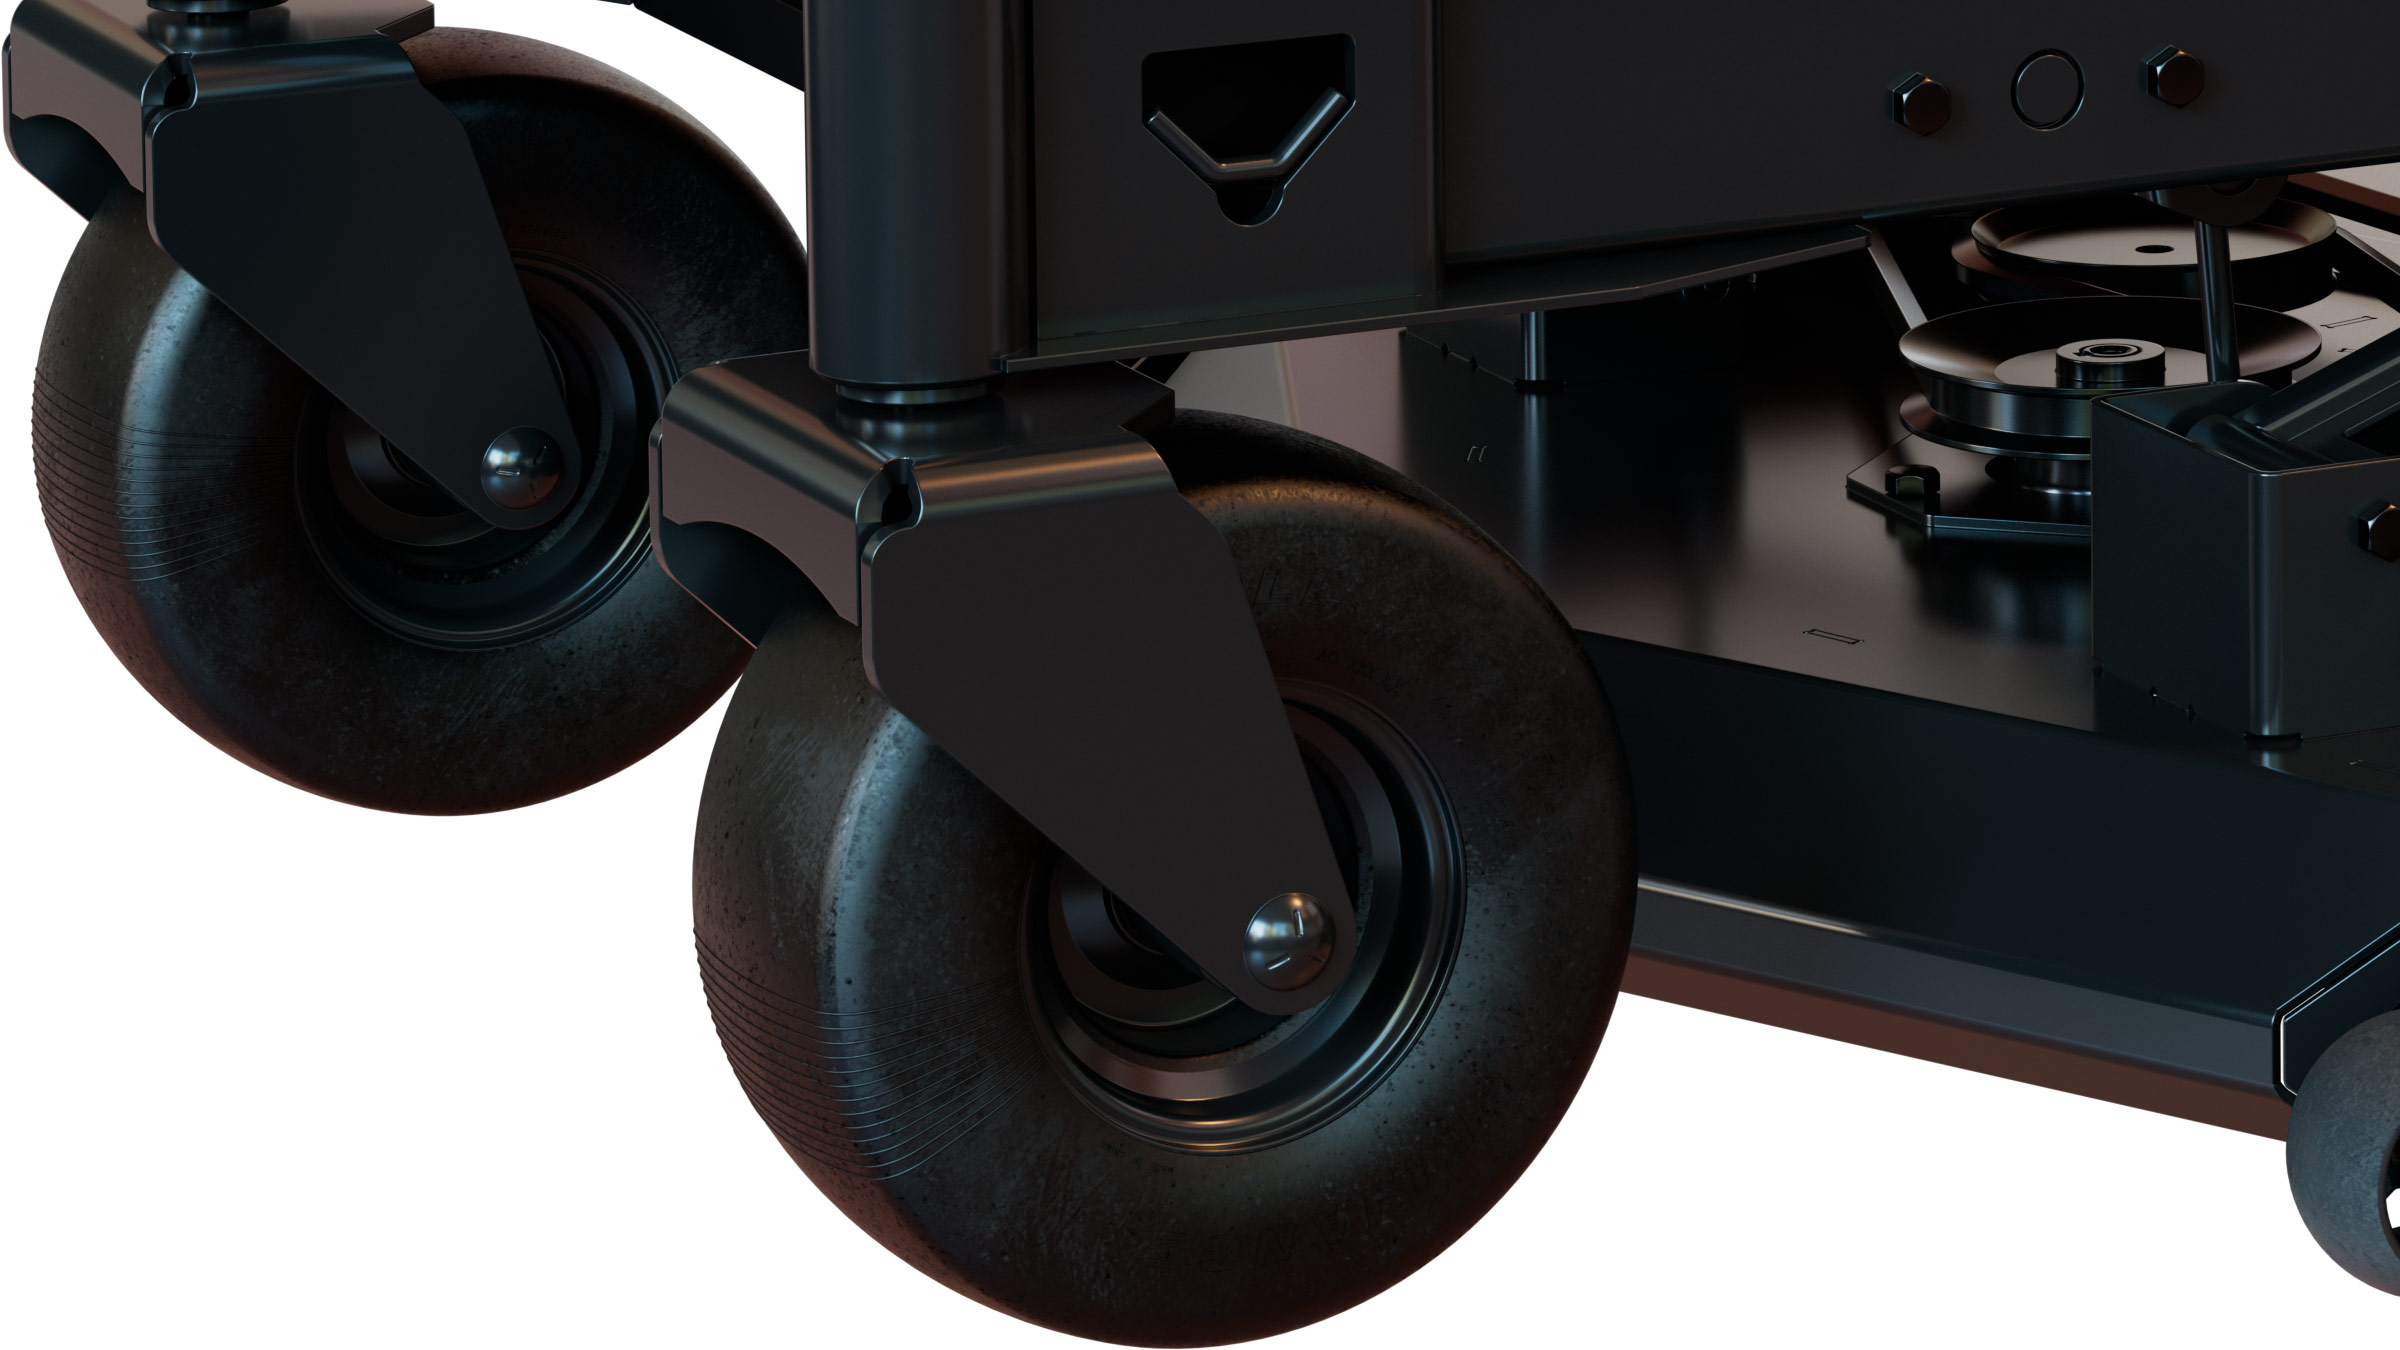 Zero-turn riding lawn mower deck and caster wheels